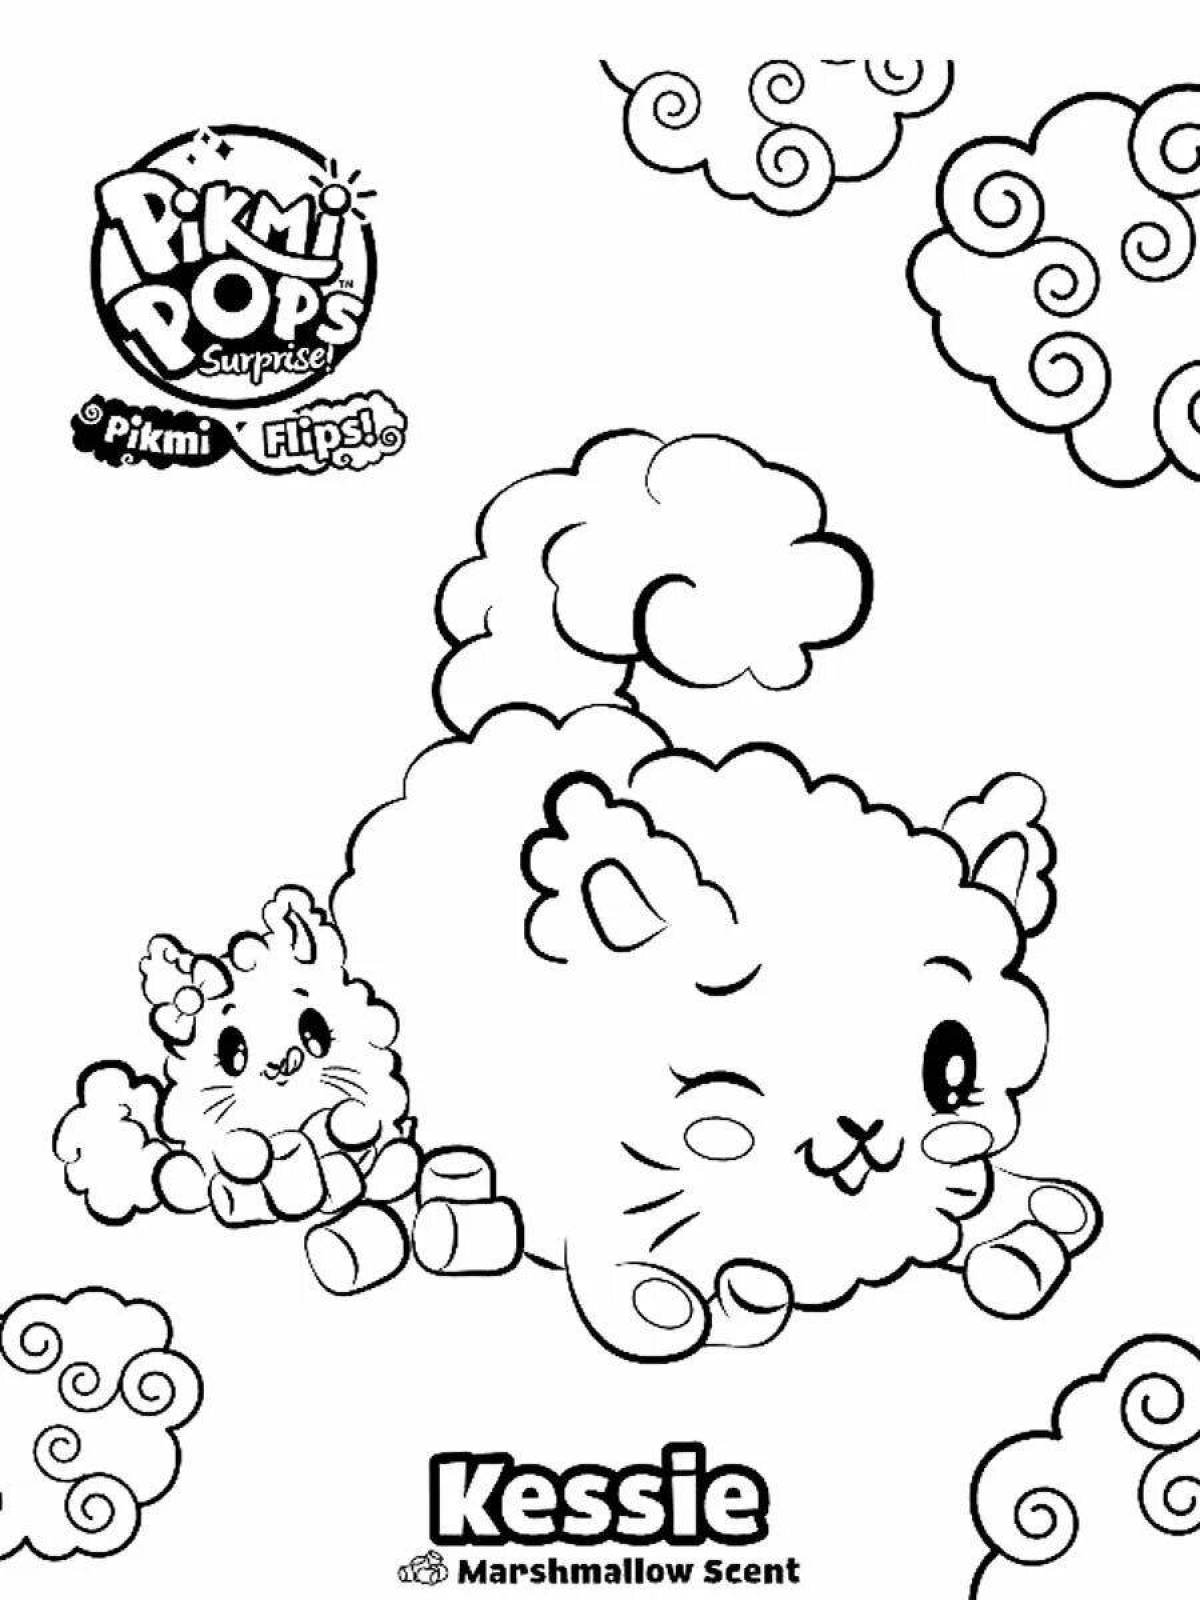 Gorgeous pikmy pops coloring page